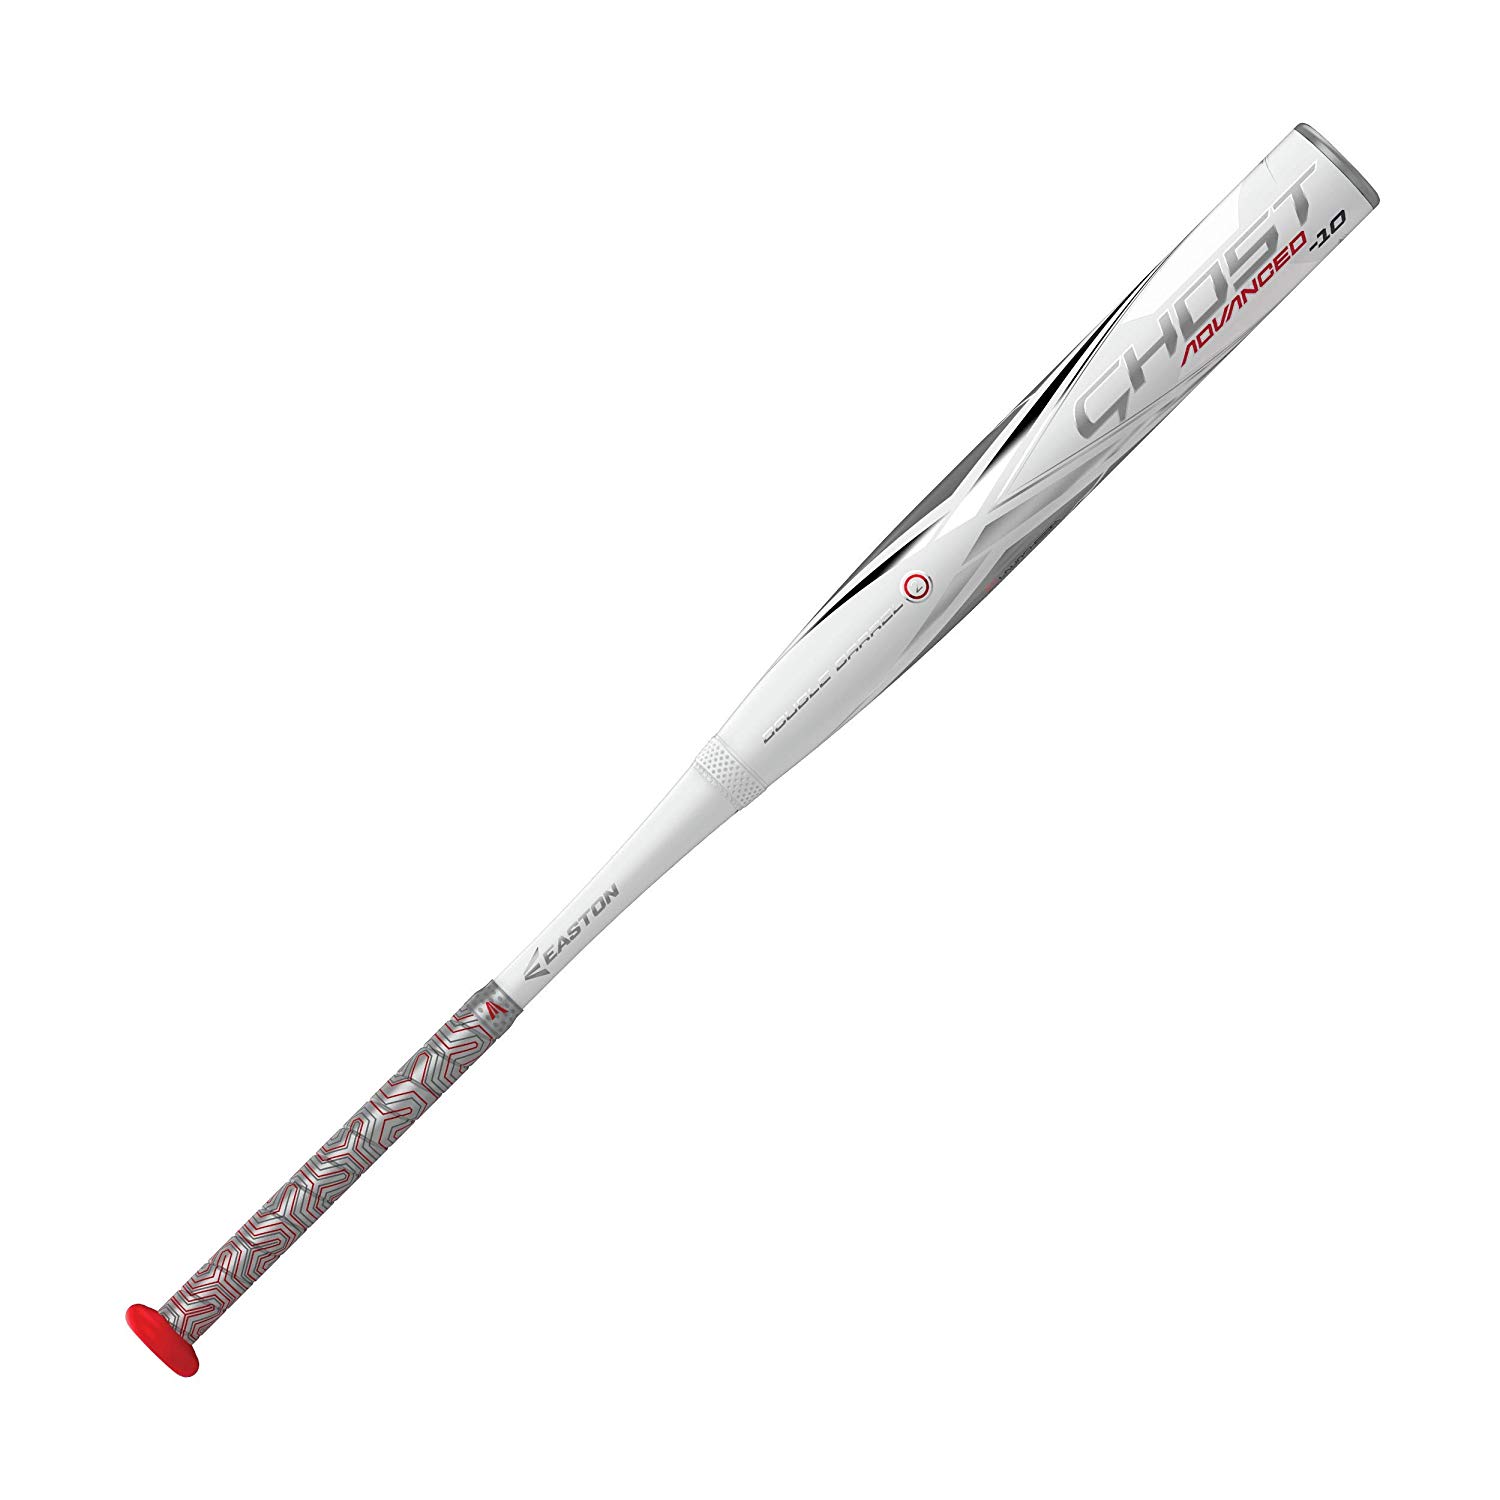 easton-ghost-advanced-2020-dual-stamp-fast-pitch-softball-bat-34-inch-24-oz FP20GHAD10-3424 Easton 628412270738 Double Barrel 2 – Second generation Double Barrel construction combines a